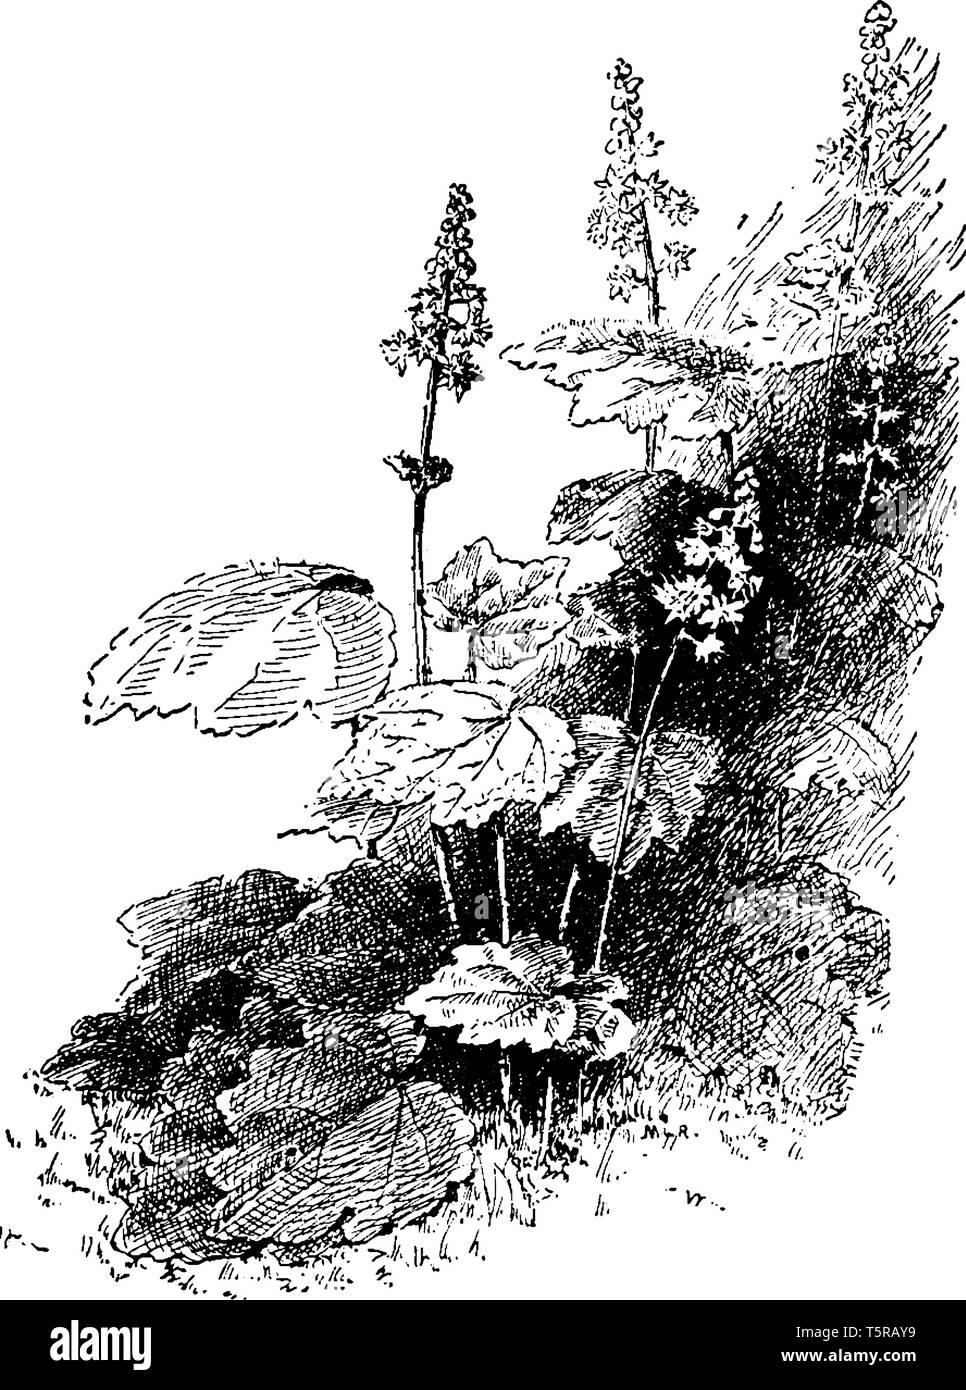 A picture is showing the branch and flowers of Tiarella Cordifolia which is a herbaceous plant used as a common shrub, vintage line drawing or engravi Stock Vector